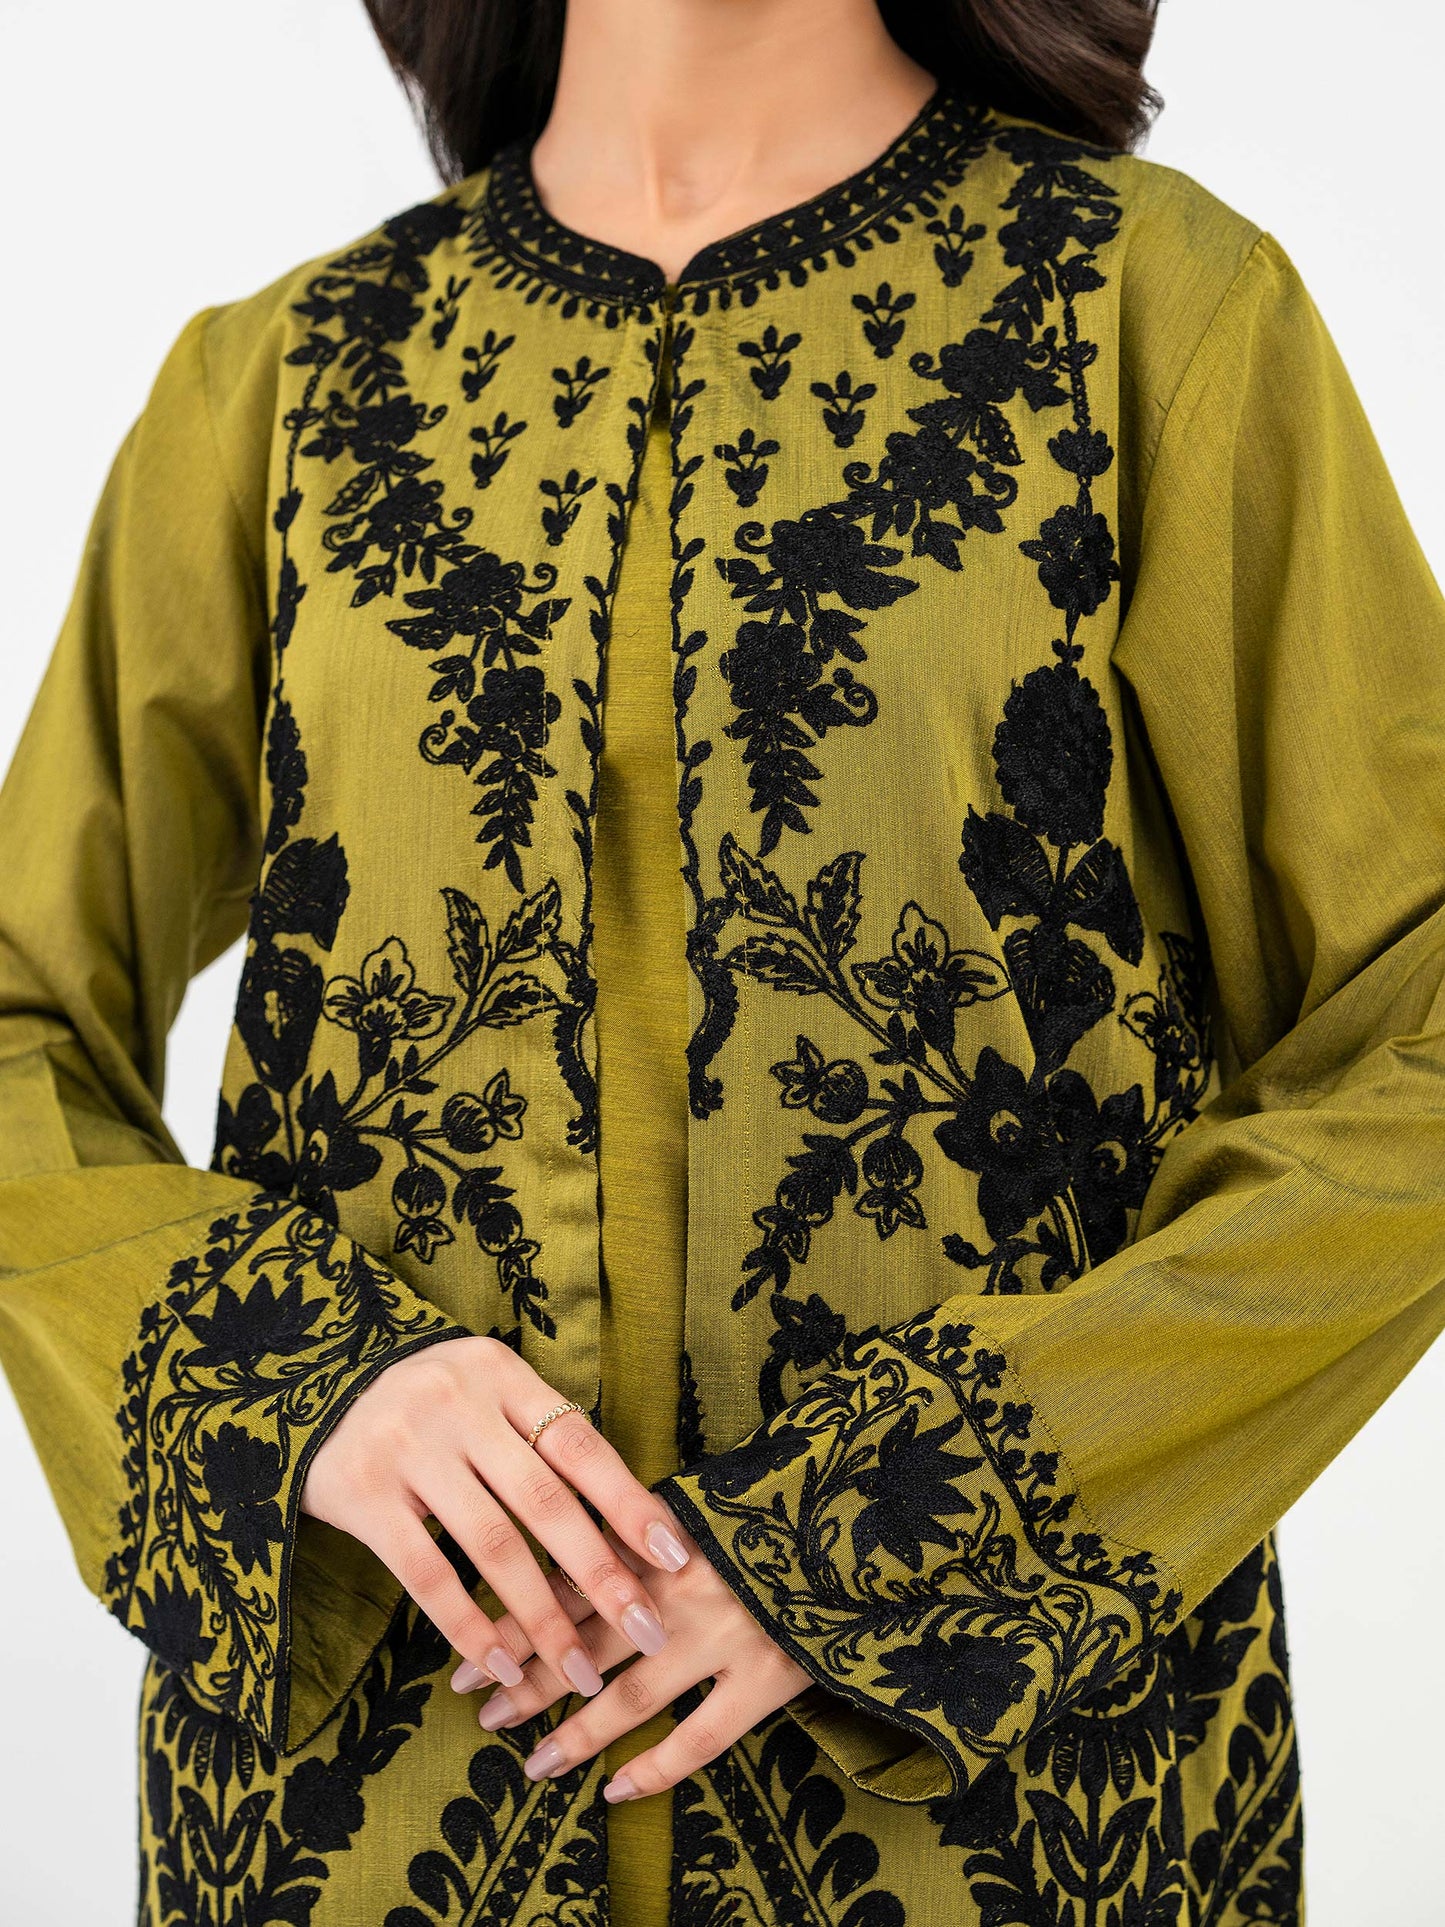 3 Piece Raw Silk Suit-Embroidered (Pret)